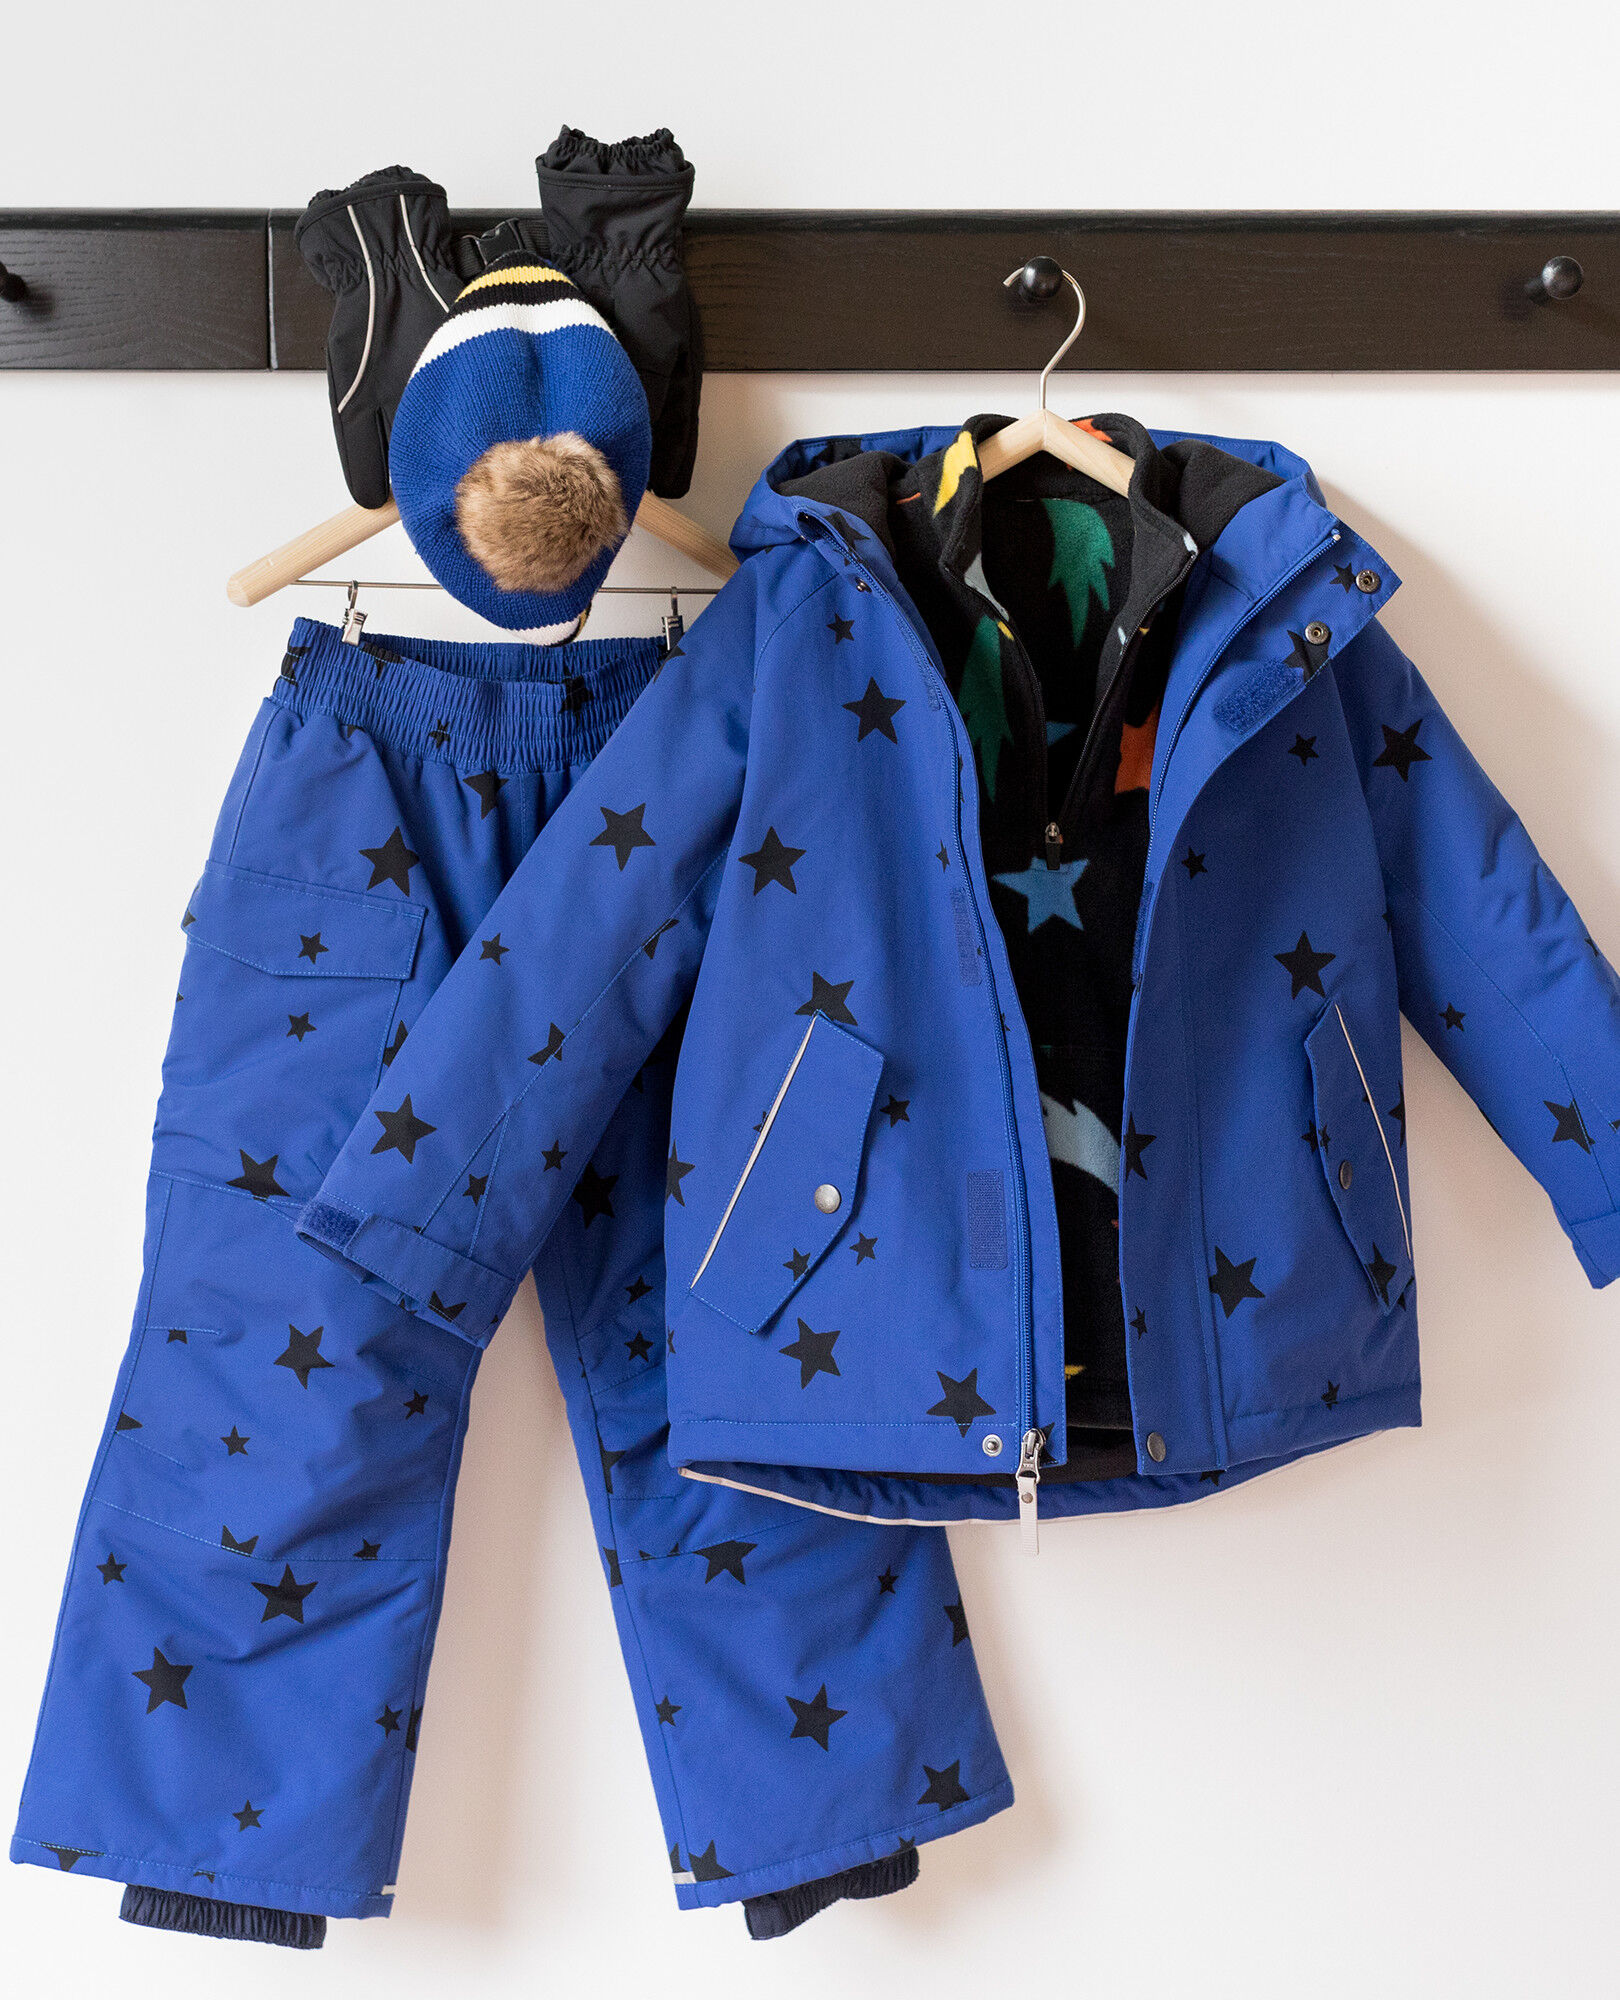 sp93 autumn and winter novelties Hanna Andersson Toddler